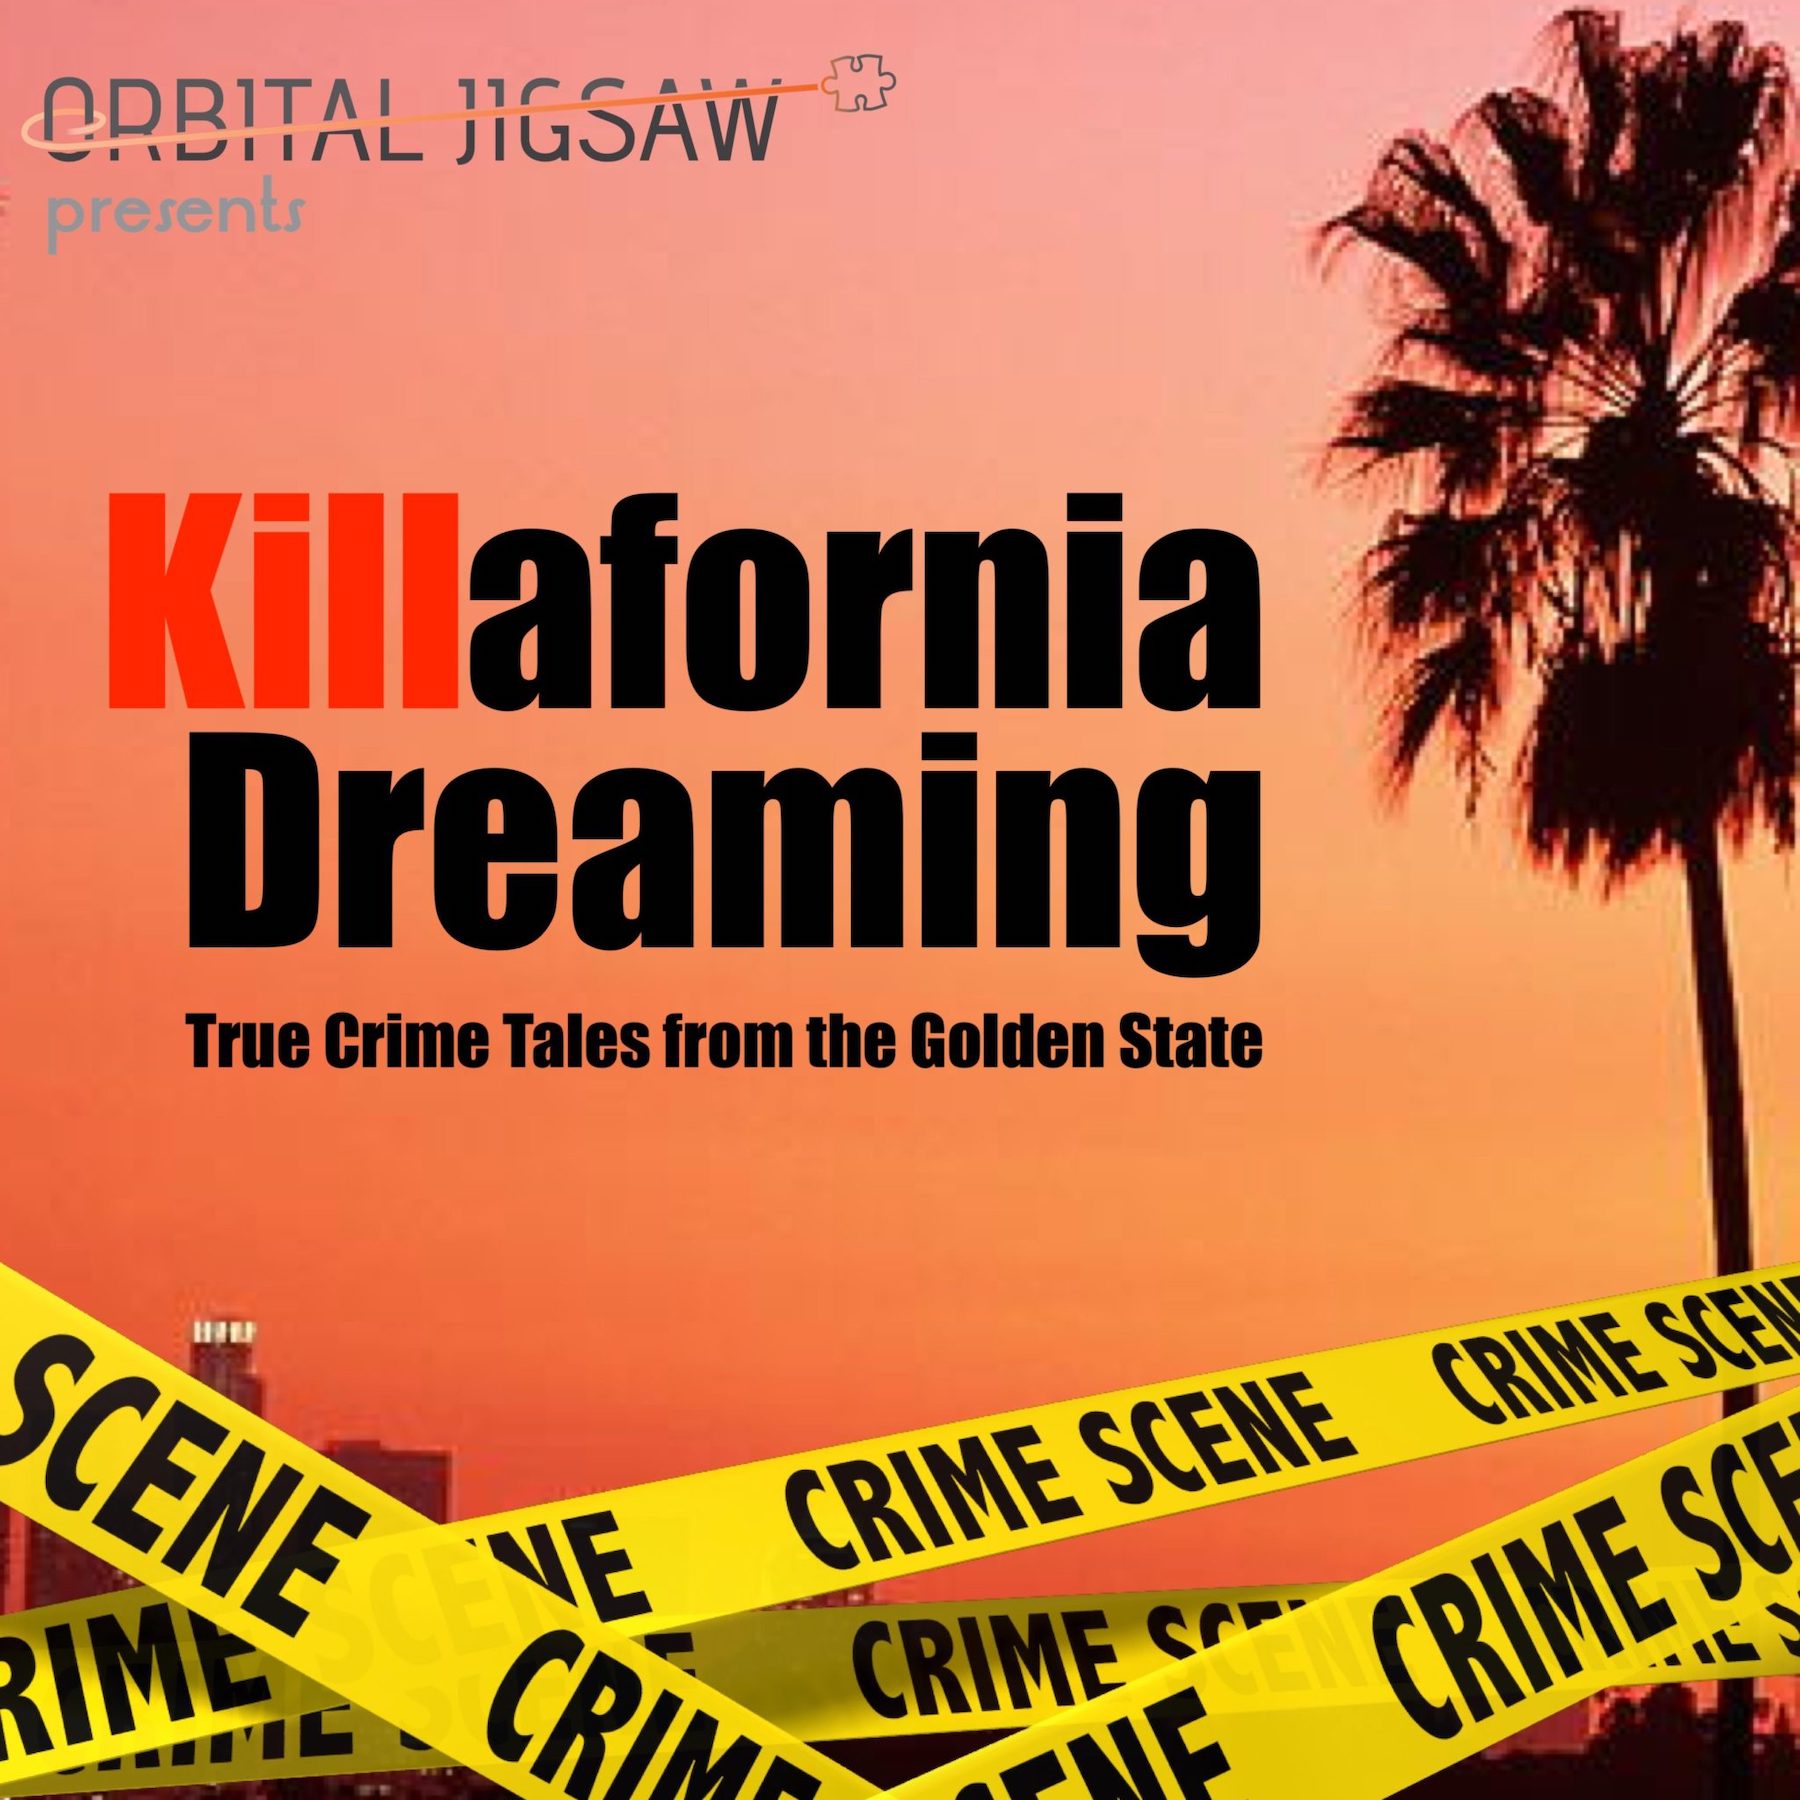 Killafornia Dreaming Podcast Cover, crime scene tape against pink sunset with palm tree silhouette. 